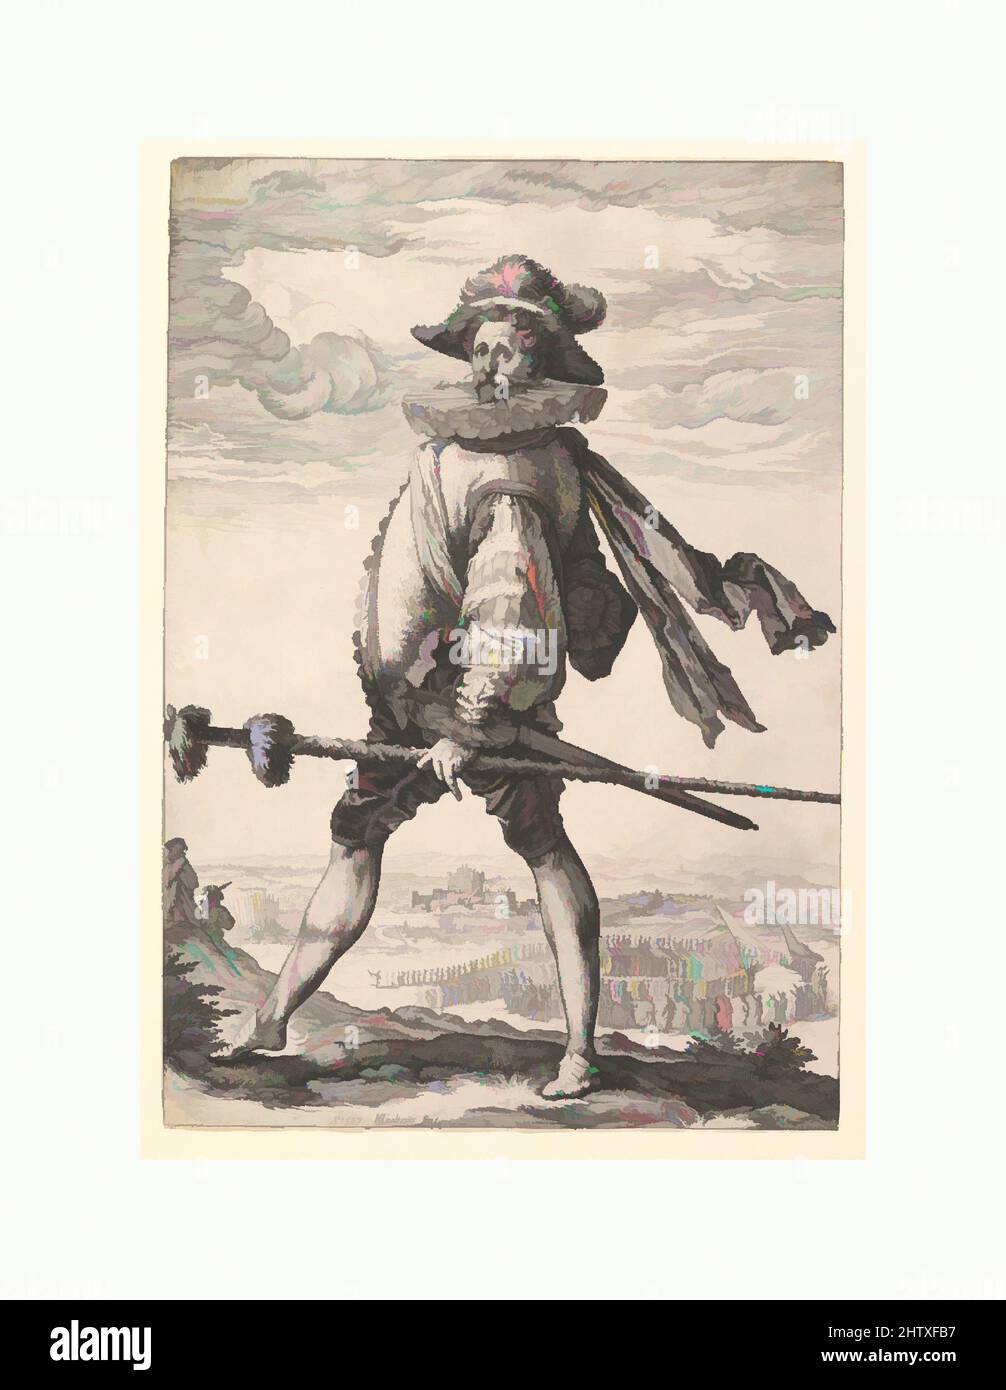 Art inspired by Captain of Infantry, 1587, Engraving, Prints, Hendrick Goltzius (Netherlandish, Mühlbracht 1558–1617 Haarlem, Classic works modernized by Artotop with a splash of modernity. Shapes, color and value, eye-catching visual impact on art. Emotions through freedom of artworks in a contemporary way. A timeless message pursuing a wildly creative new direction. Artists turning to the digital medium and creating the Artotop NFT Stock Photo